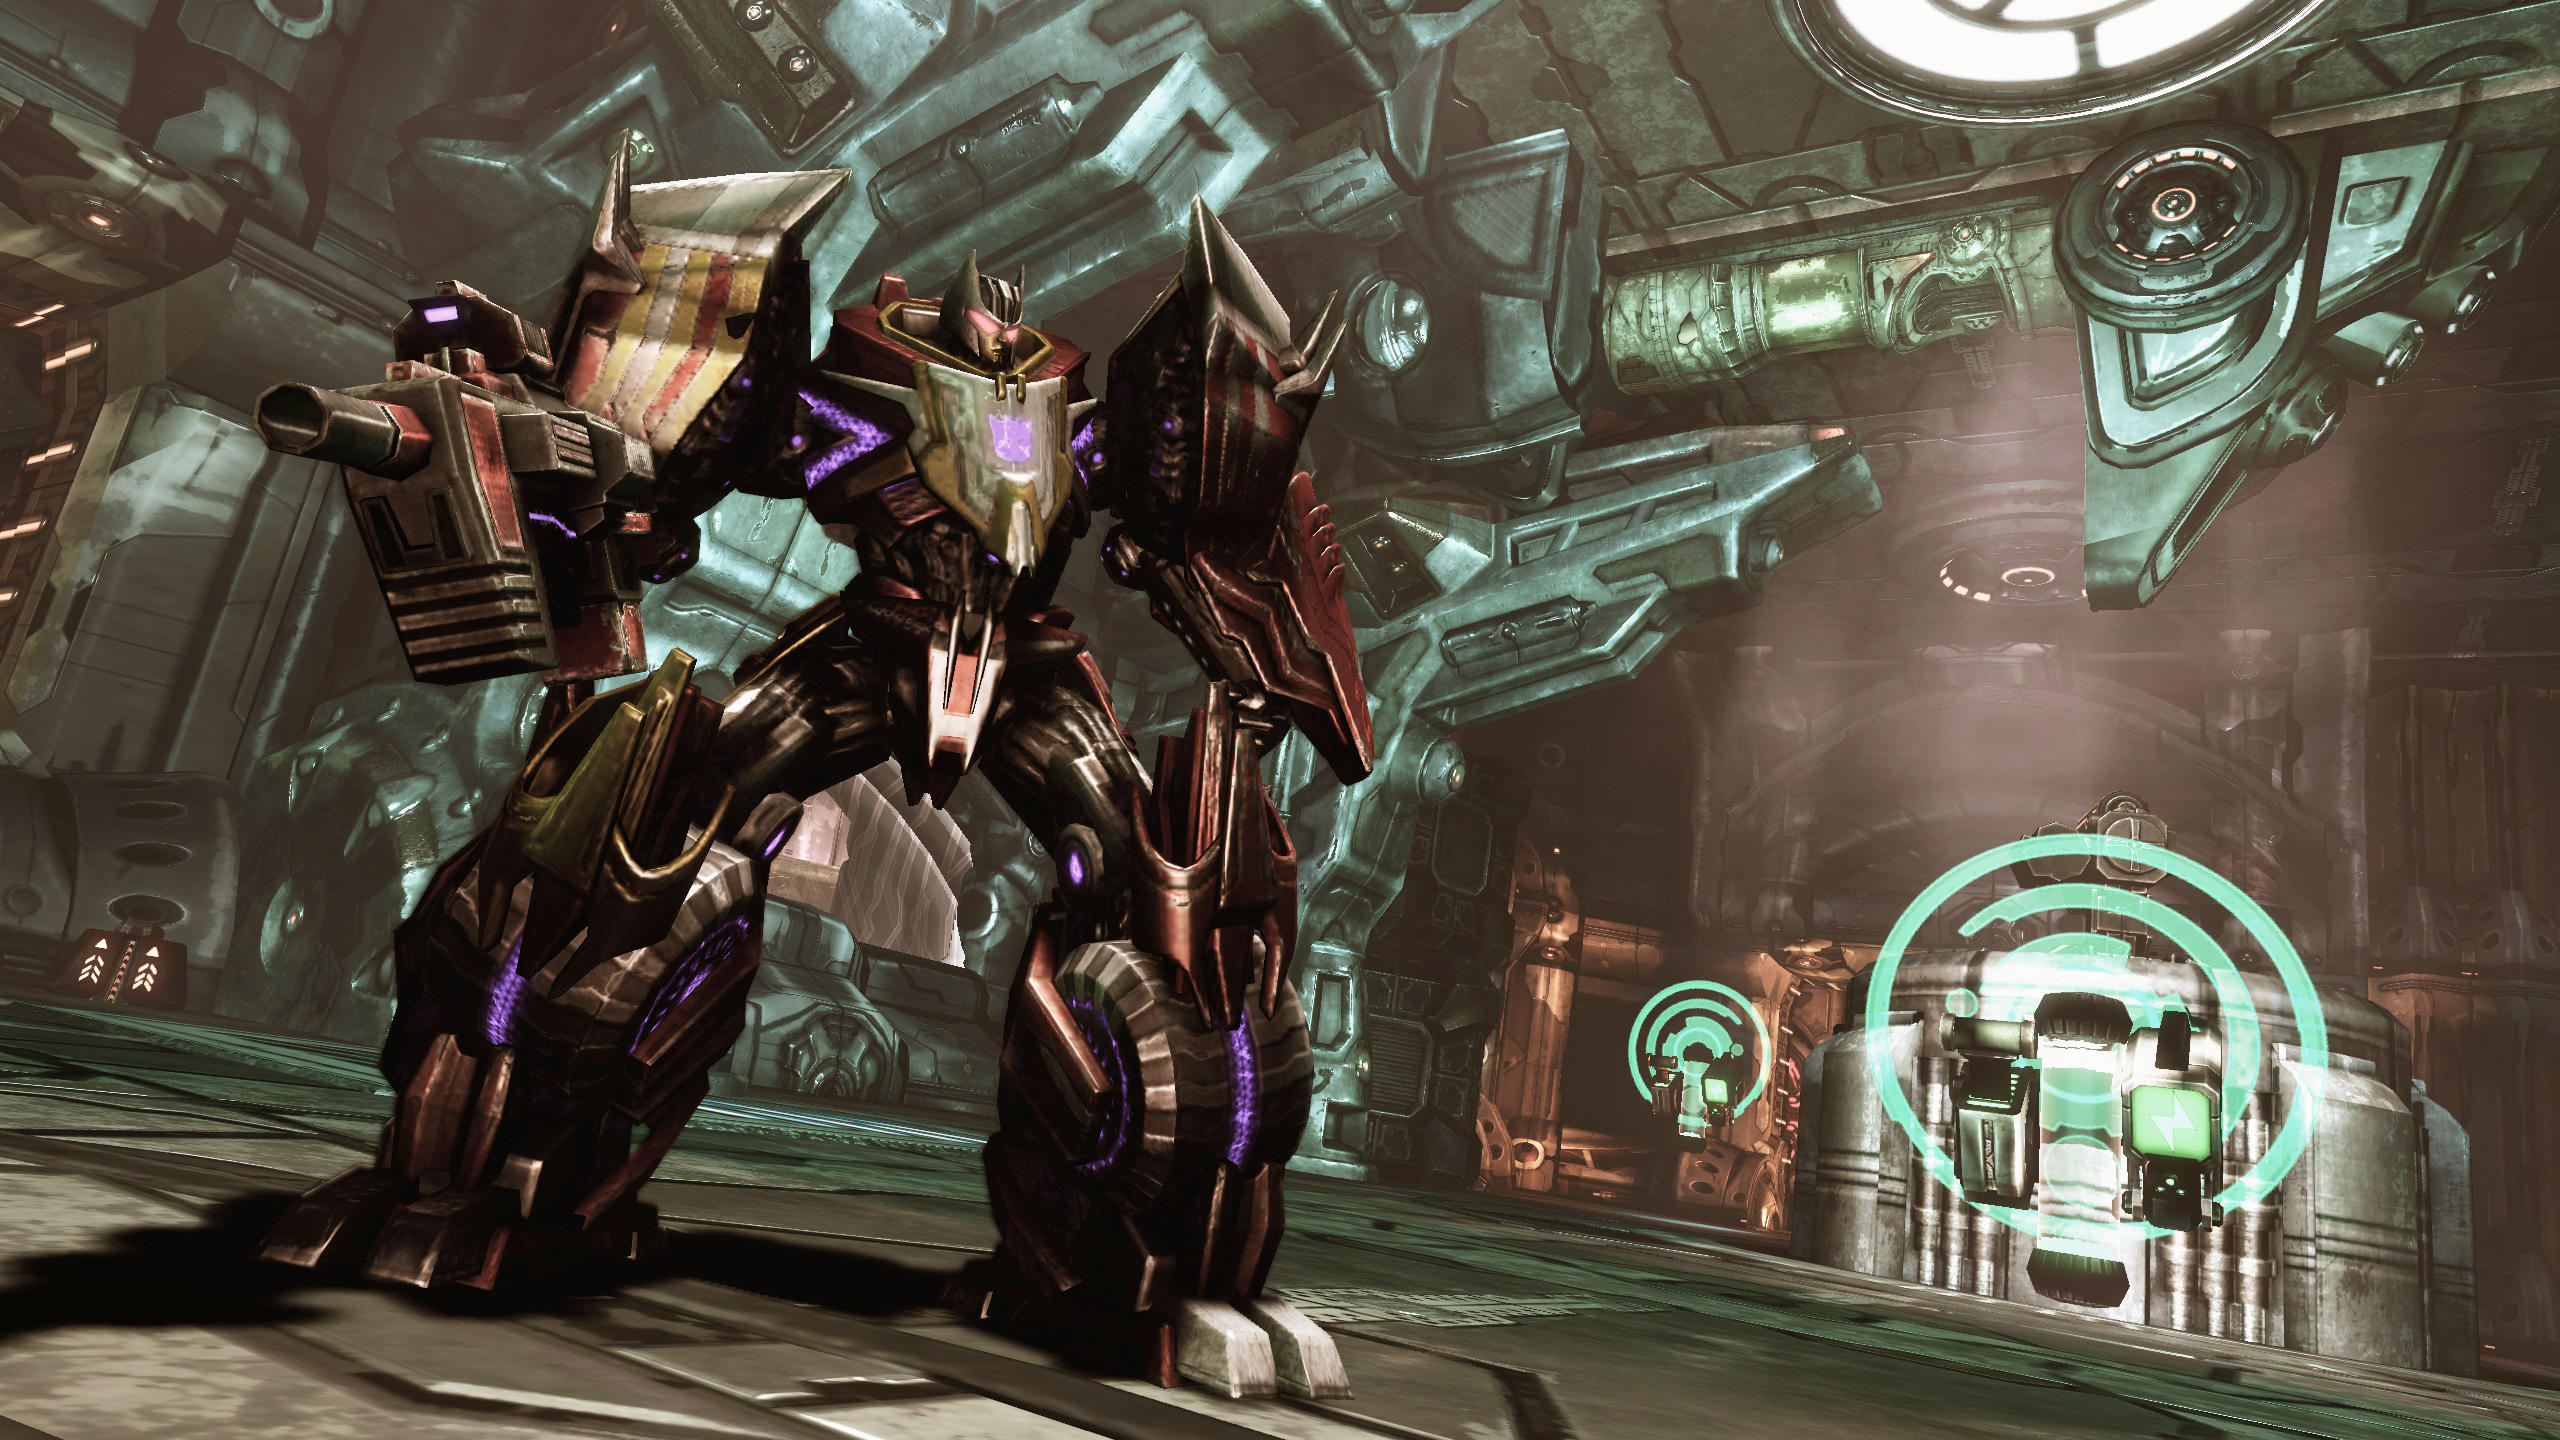 Transformers: War For Cybertron Backgrounds, Compatible - PC, Mobile, Gadgets| 2560x1440 px